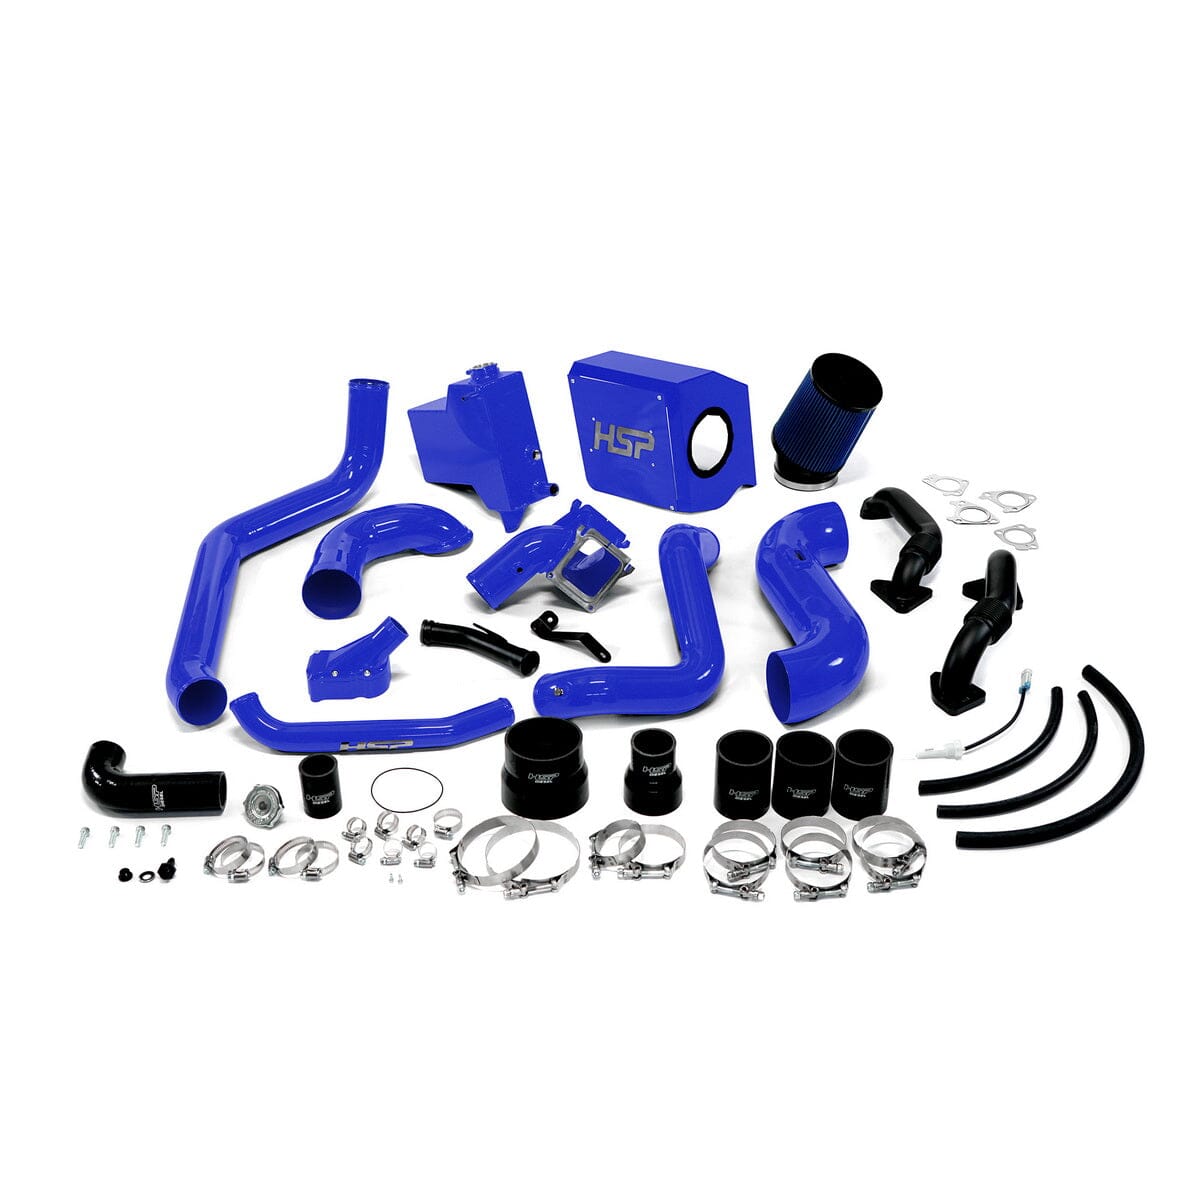 HSP Deluxe Max Air Flow Bundle (2007.5-2010 Chevrolet / GMC) Cold Air Intake HSP Diesel Candy Blue 